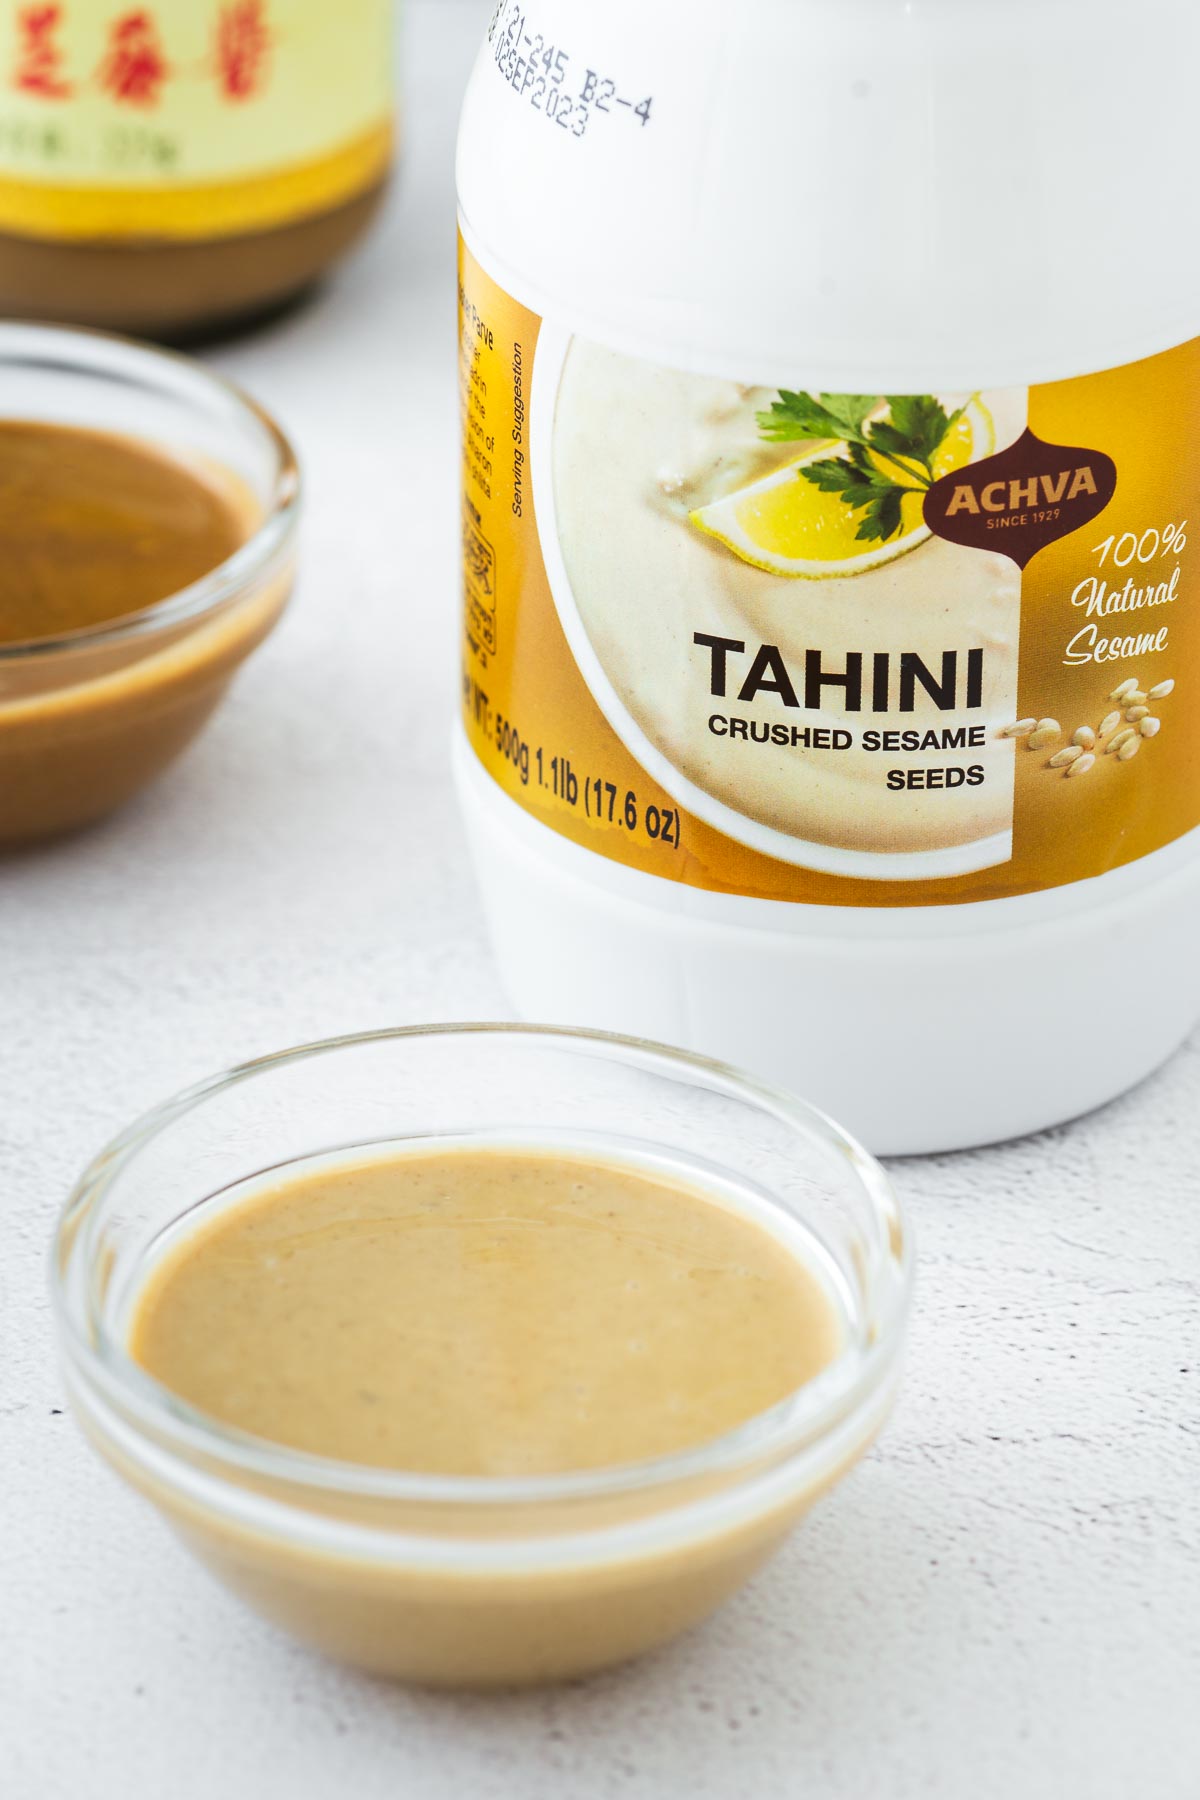 Light coloured tahini paste in a small glass bowl with darker sesame paste in the background.